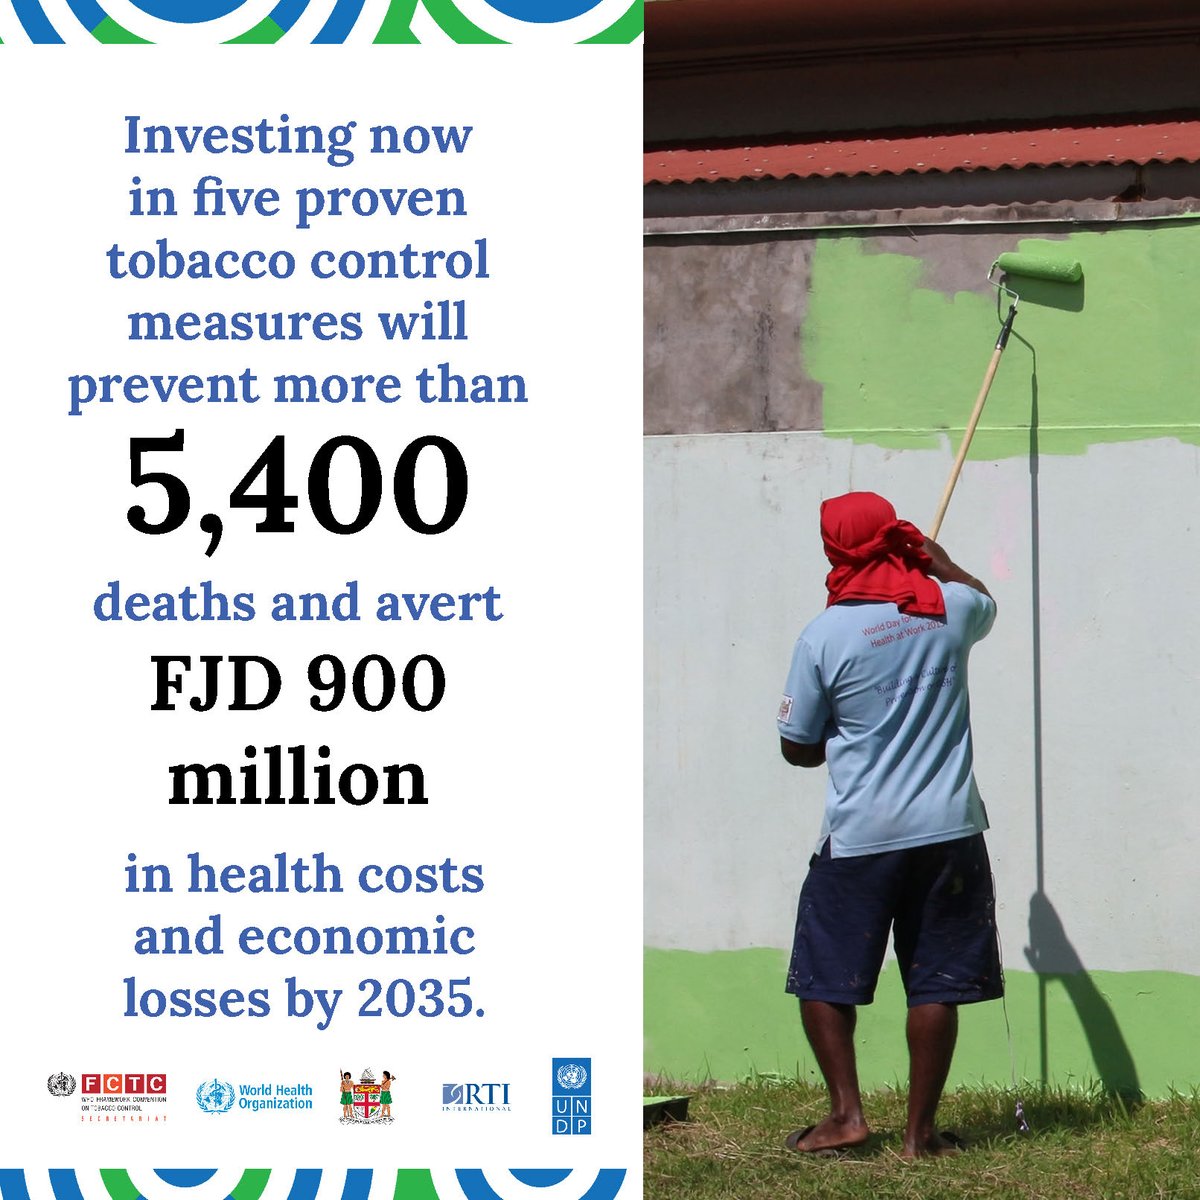 Investing in tobacco control can save lives and money. Tobacco control measures save 5,400 lives and avert FJD 900 million by 2035! Invest in a healthier Fiji – invest in tobacco control. #tobaccocontrol #healthyFiji #ROI #invest